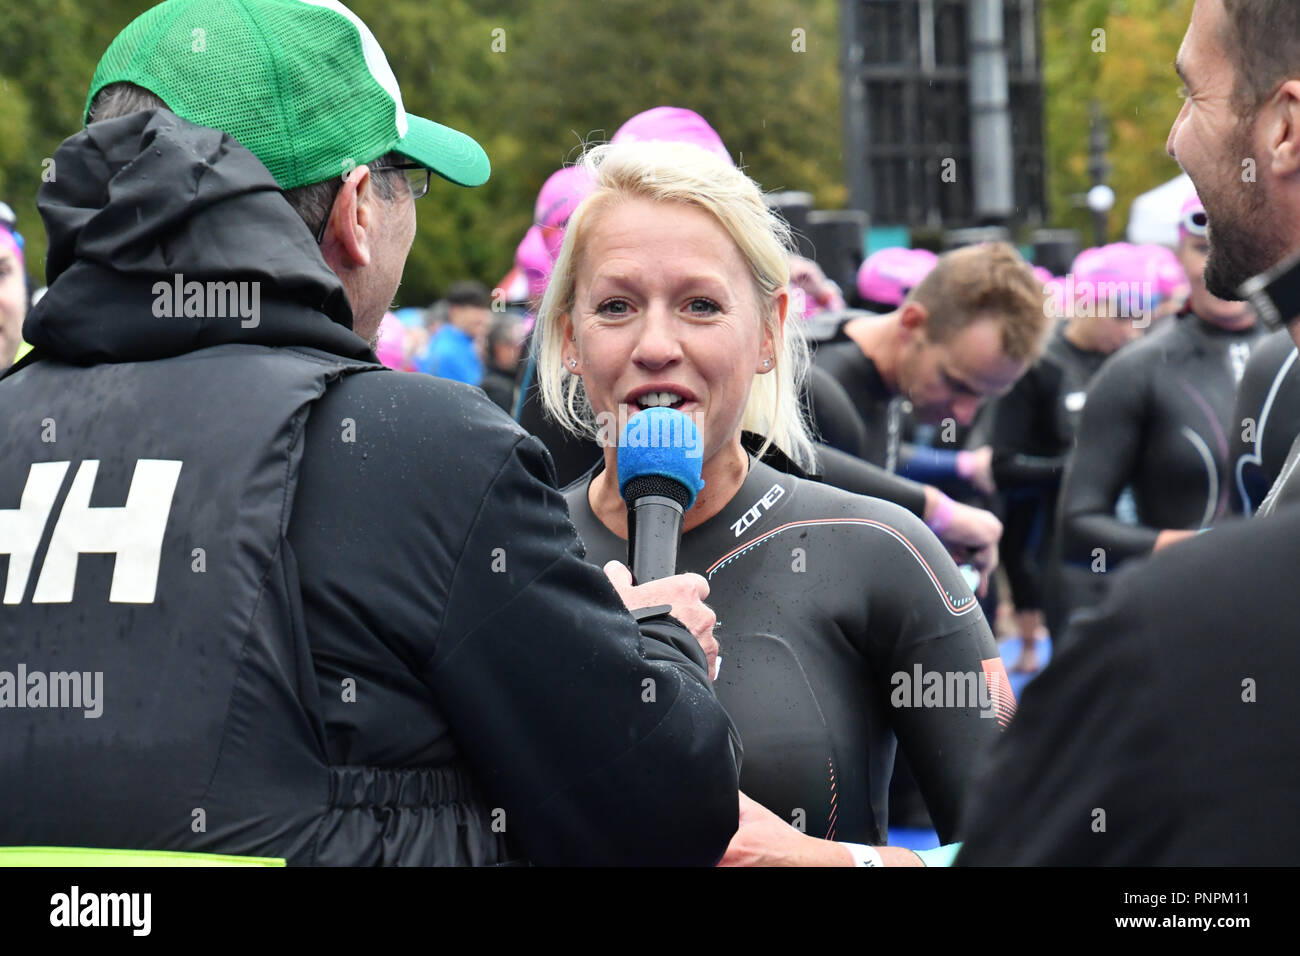 Gail Emms is a English badminton player feeling a bit nervous Swim Serpentine 2018, London, UK. 22 September 2018. Credit: Picture Capital/Alamy Live News Stock Photo